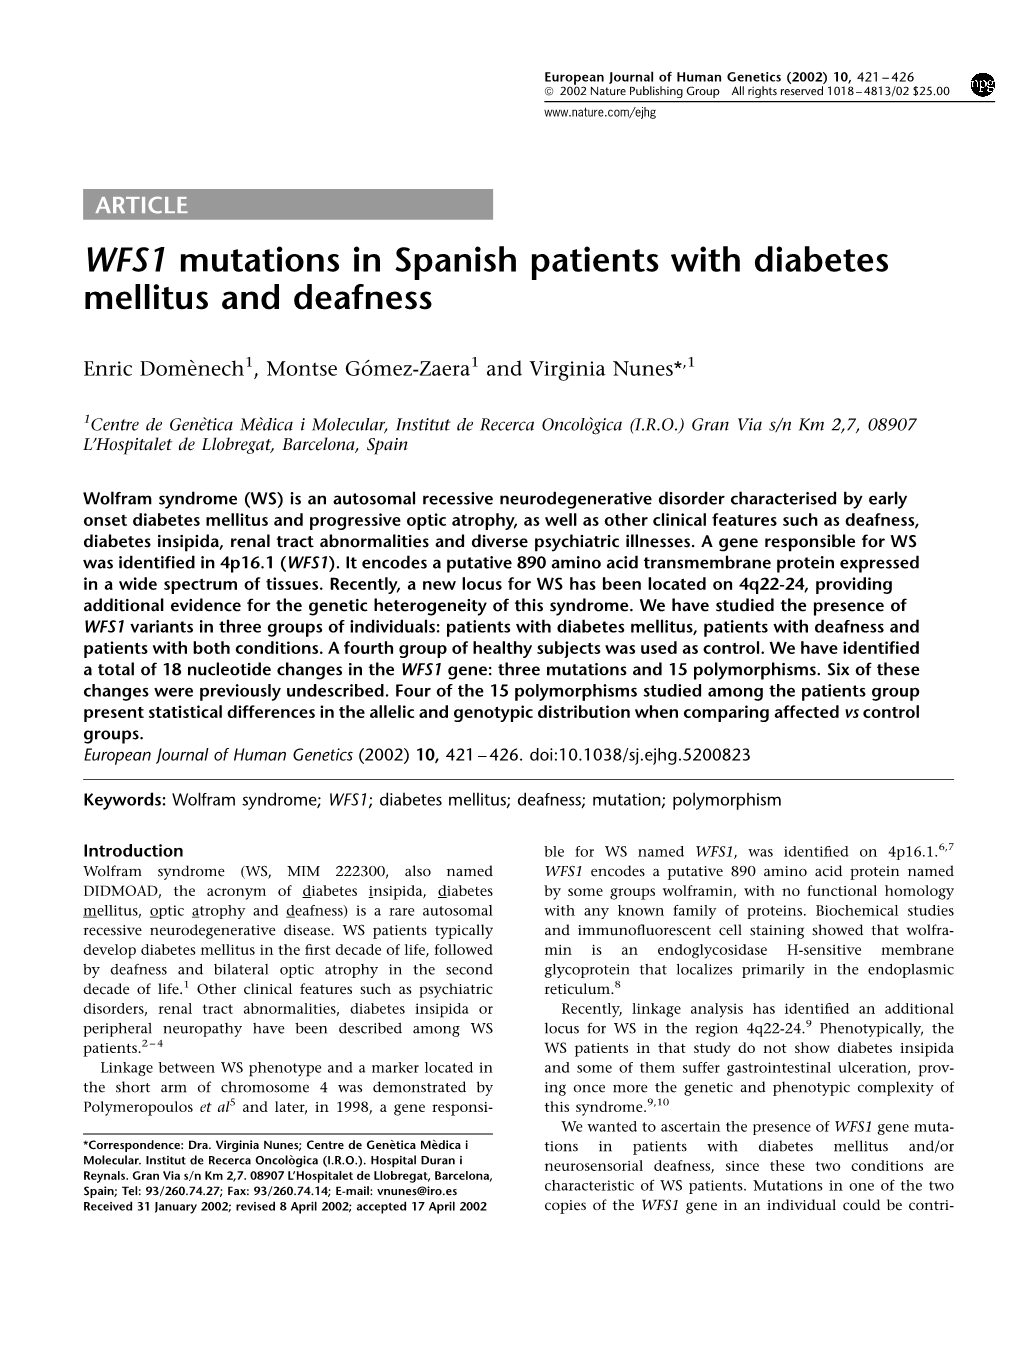 WFS1 Mutations in Spanish Patients with Diabetes Mellitus and Deafness